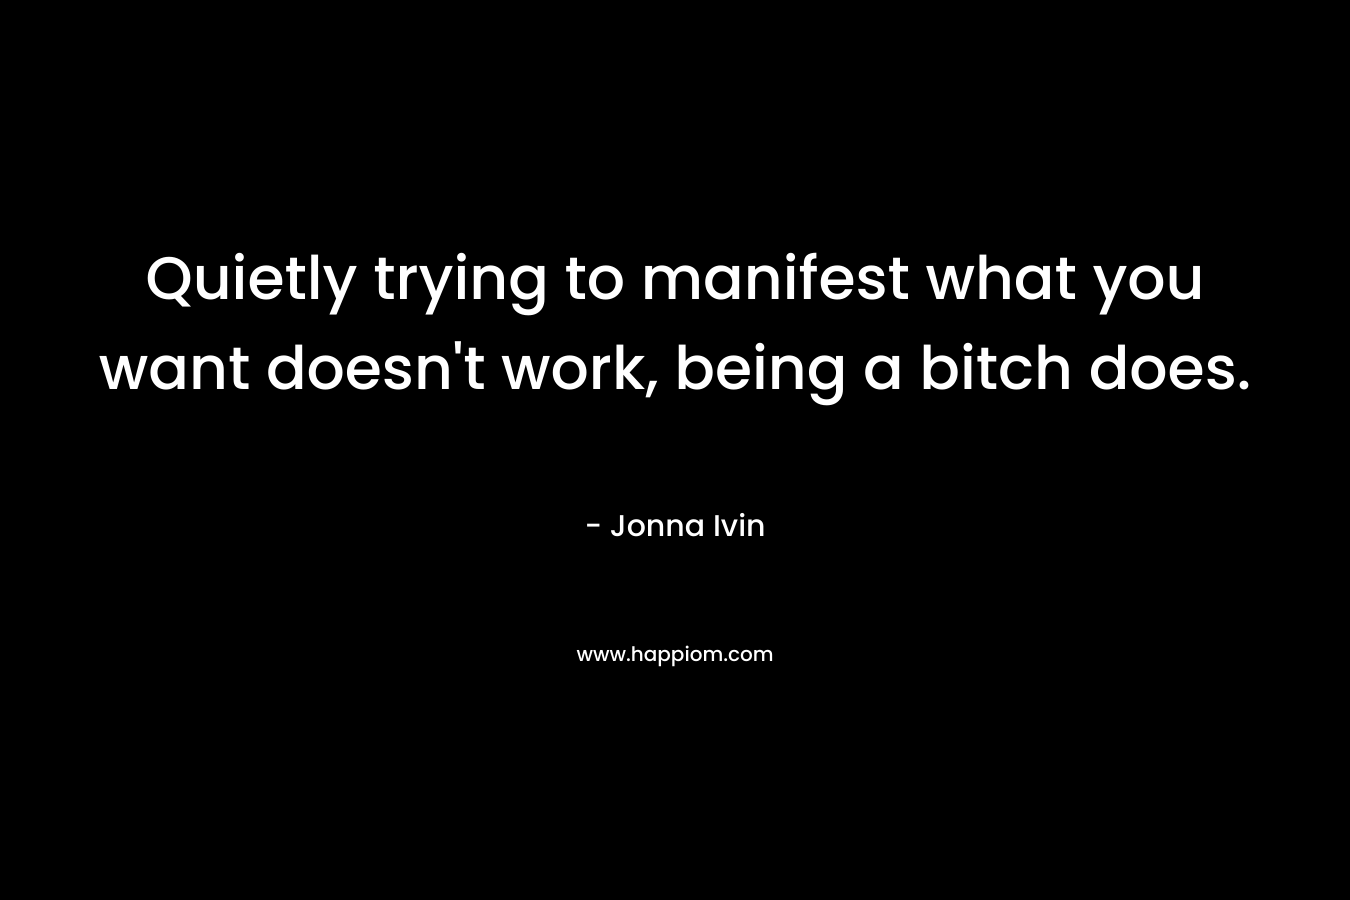 Quietly trying to manifest what you want doesn’t work, being a bitch does. – Jonna Ivin